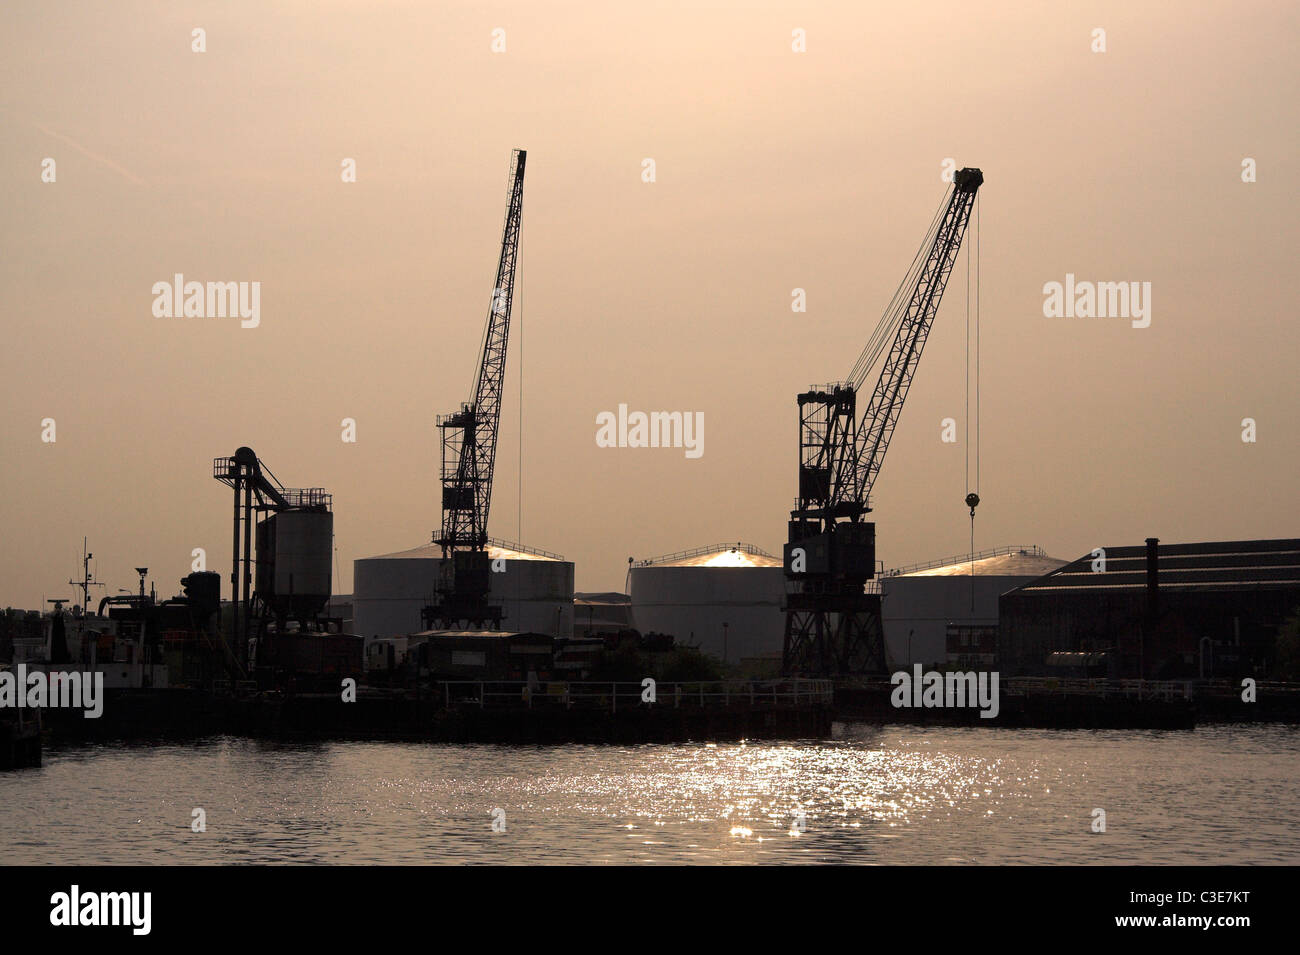 Docks, Industry on the Manchester Ship Canal, Salford Quays, Manchester, UK Stock Photo